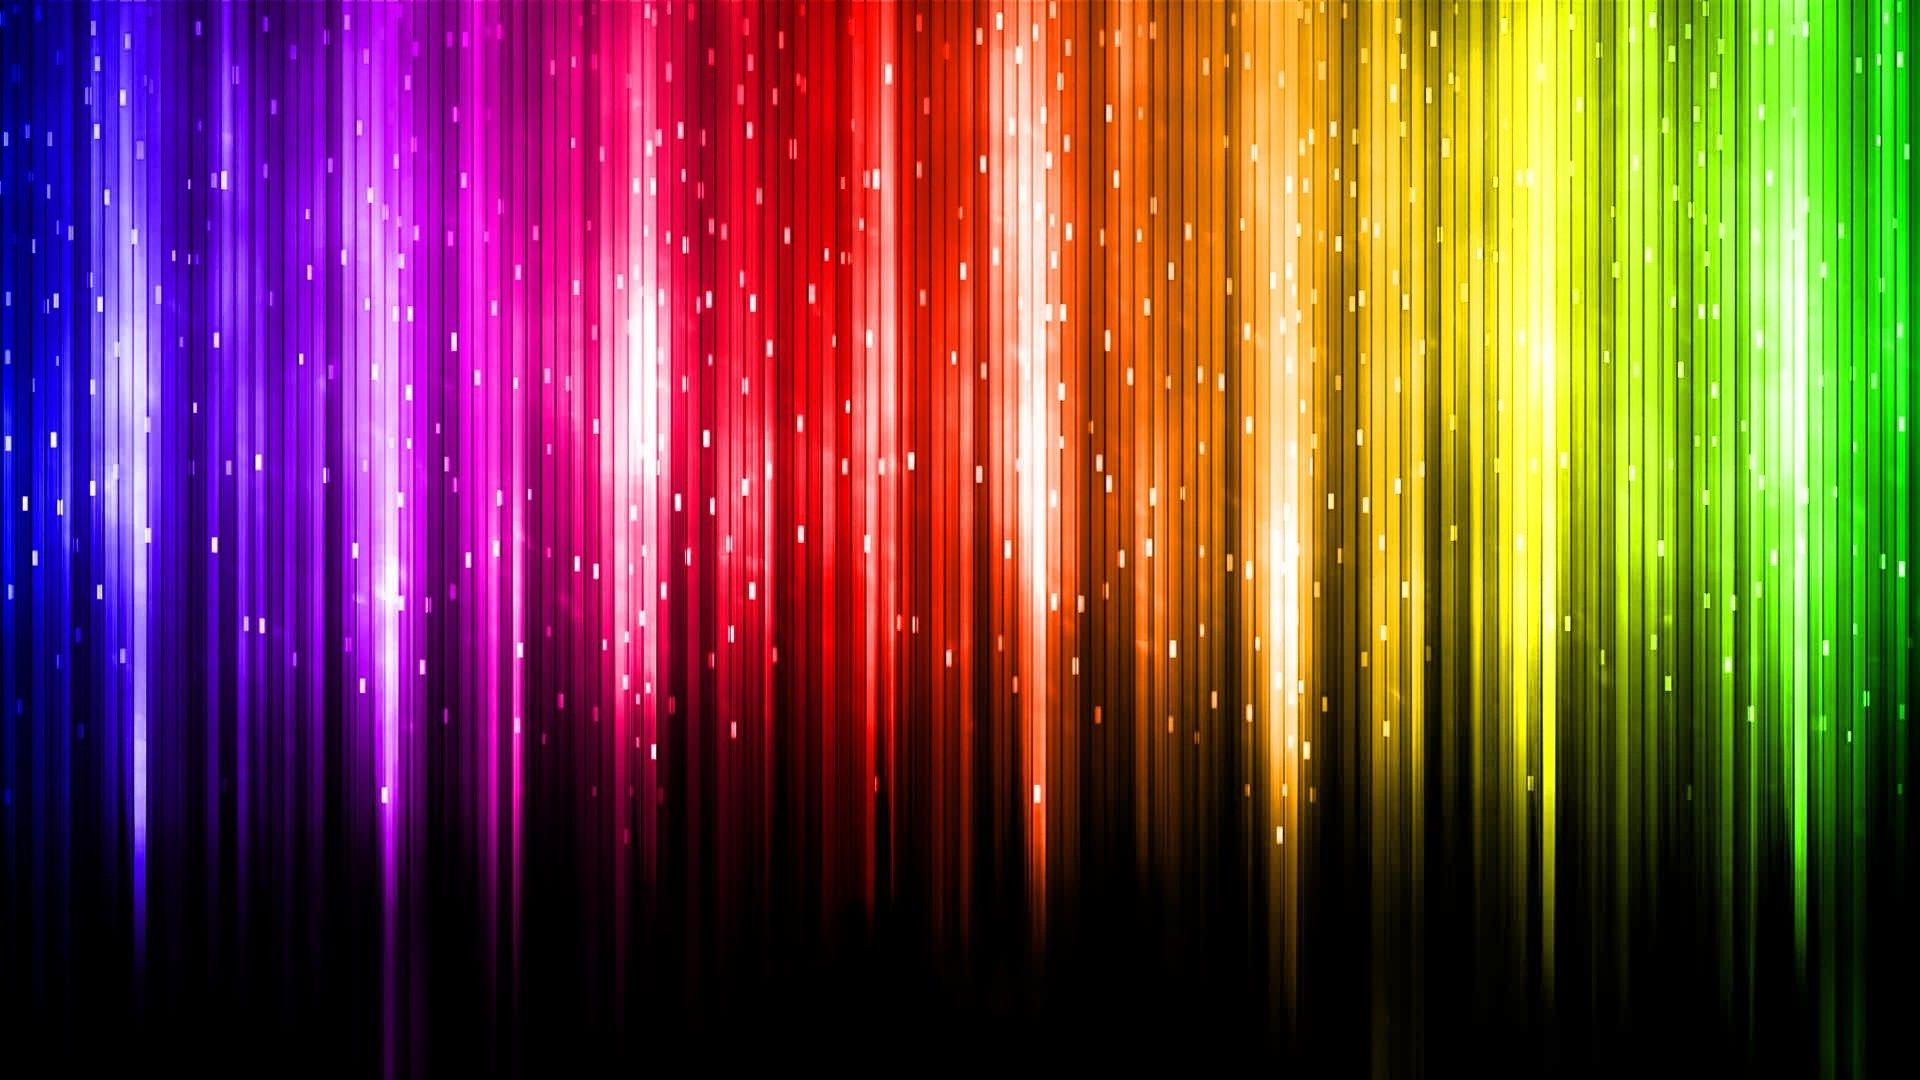 Wallpaper.wiki Colorful Abstract Background PIC WPB0012410